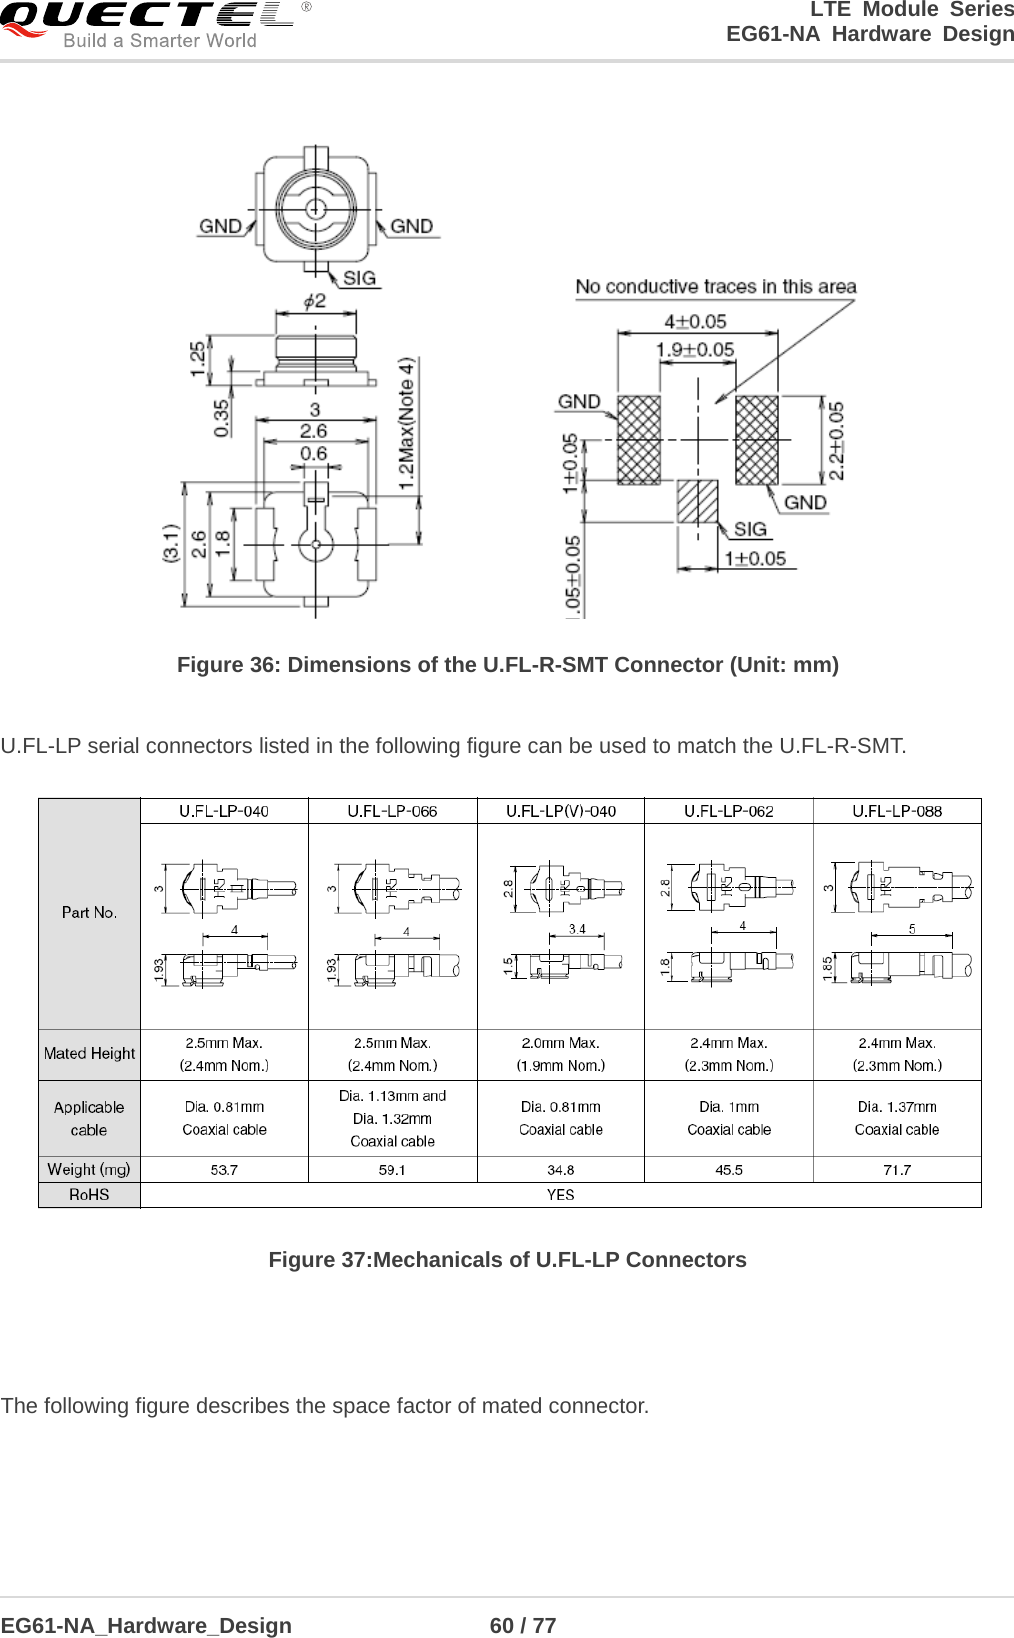 LTE Module Series                                                  EG61-NA Hardware Design  EG61-NA_Hardware_Design                  60 / 77     Figure 36: Dimensions of the U.FL-R-SMT Connector (Unit: mm)  U.FL-LP serial connectors listed in the following figure can be used to match the U.FL-R-SMT.  Figure 37:Mechanicals of U.FL-LP Connectors    The following figure describes the space factor of mated connector. 